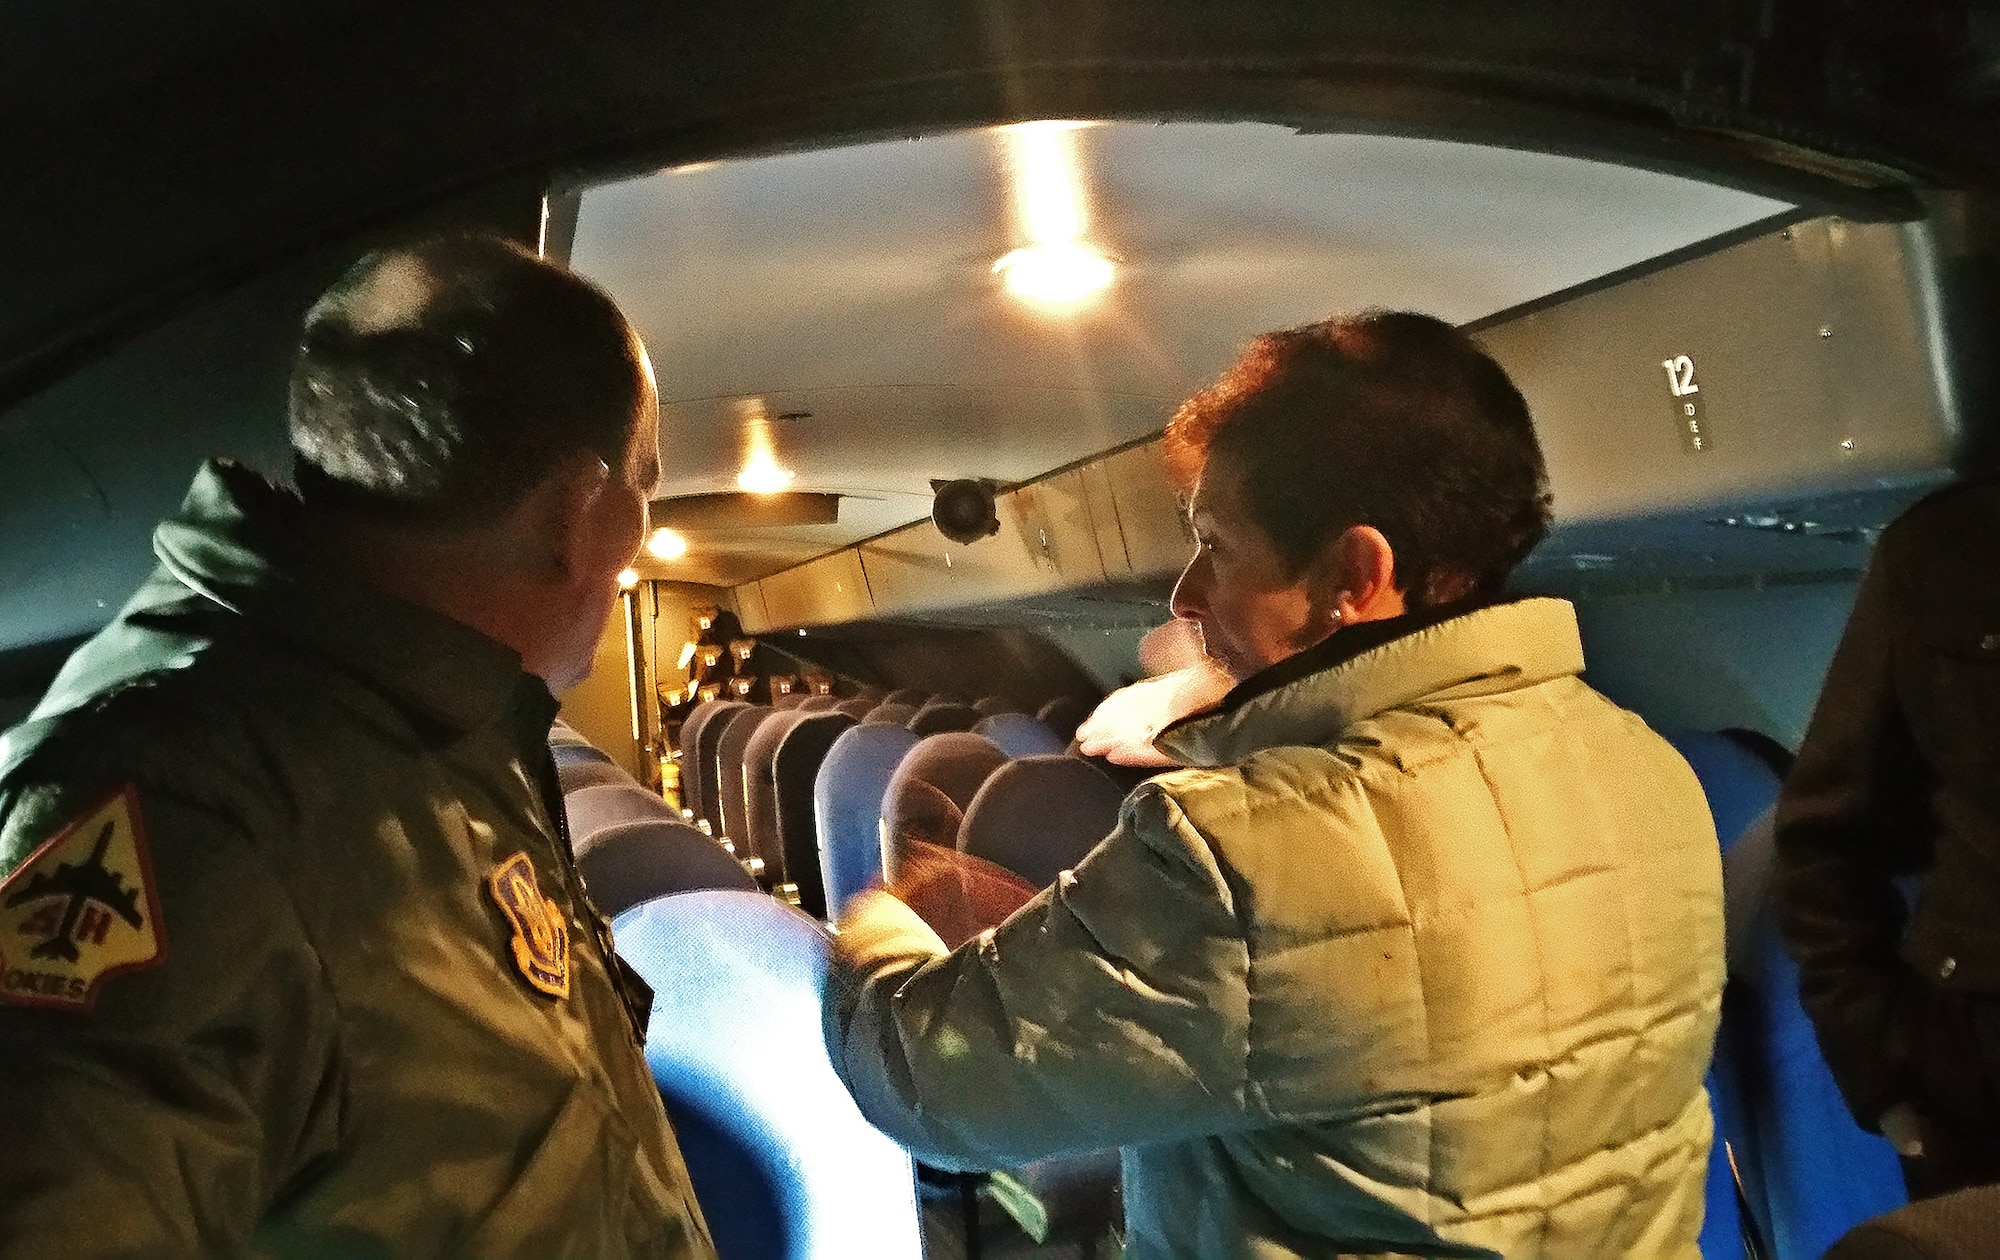 Retired Col. Regina Aune, right, describes to Col. Thomas K. Smith, 433rd Airlift Wing commander, Dec. 19, 2016, how the children were bedded down in the overhead troop compartment of the aircraft, during “Operation Babylift.” Aune was on the first military aircraft to Vietnam to bring the refugees to the United States. “Operation Babylift” was a combined effort between the United States, Canada, Australia and France, to evacuate more than 3,300 refugees from South Vietnam. (U.S. Air Force photo by Minnie Jones)     